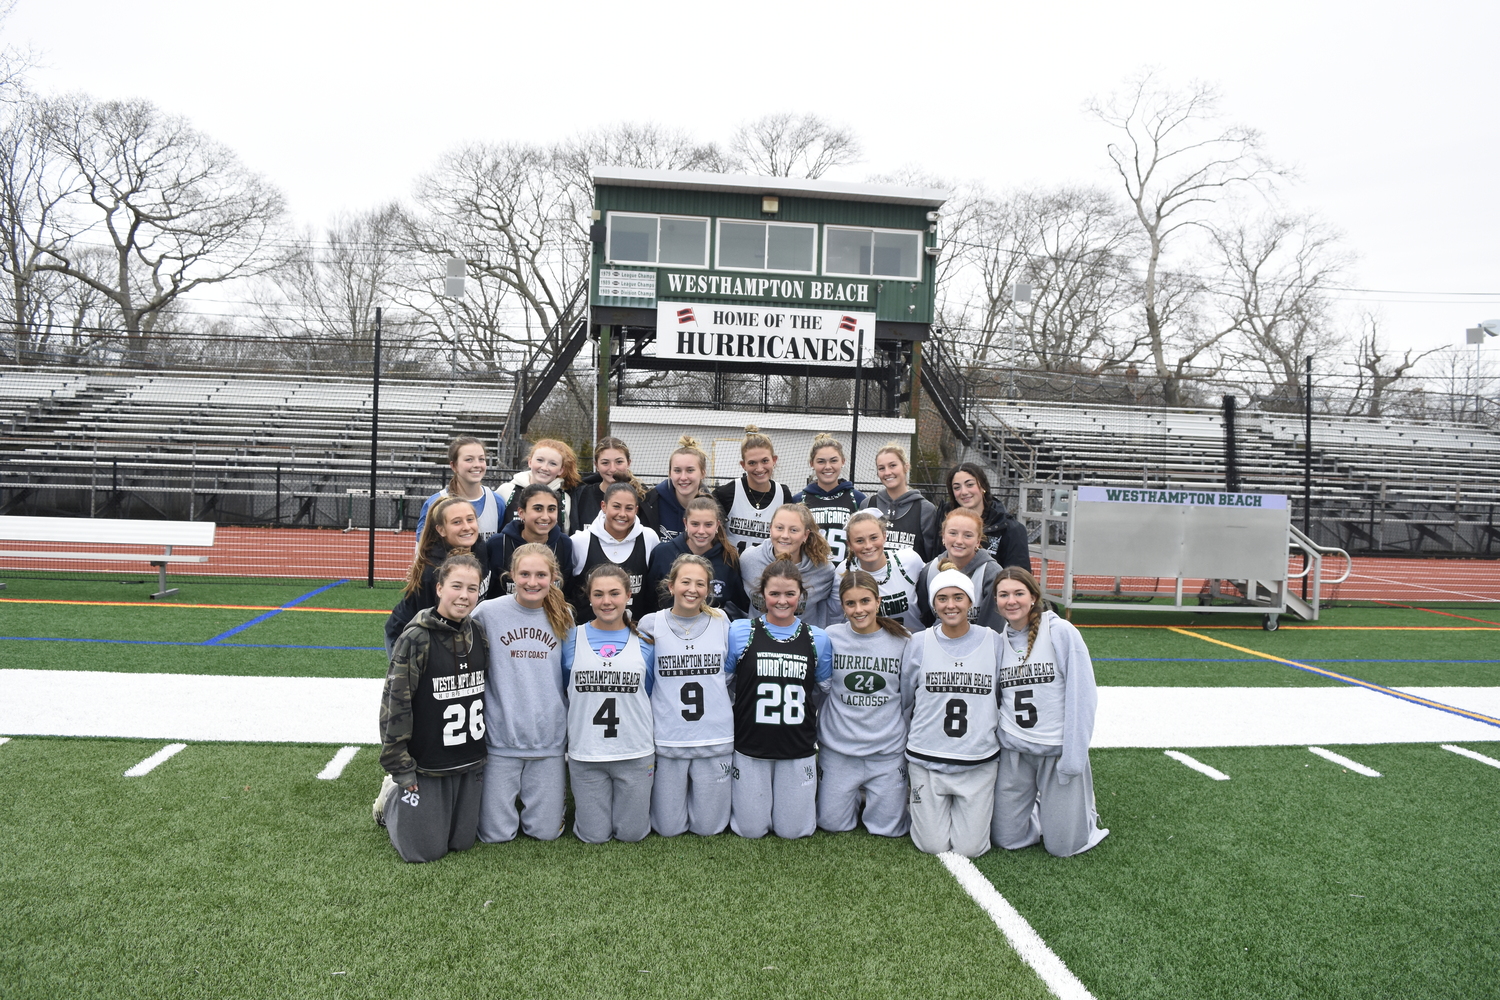 The Westhampton Beach girls lacrosse team boasts 20 returning players from last season's squad. The Hurricanes reached the first round of the Suffolk County Class C playoffs.  DREW BUDD